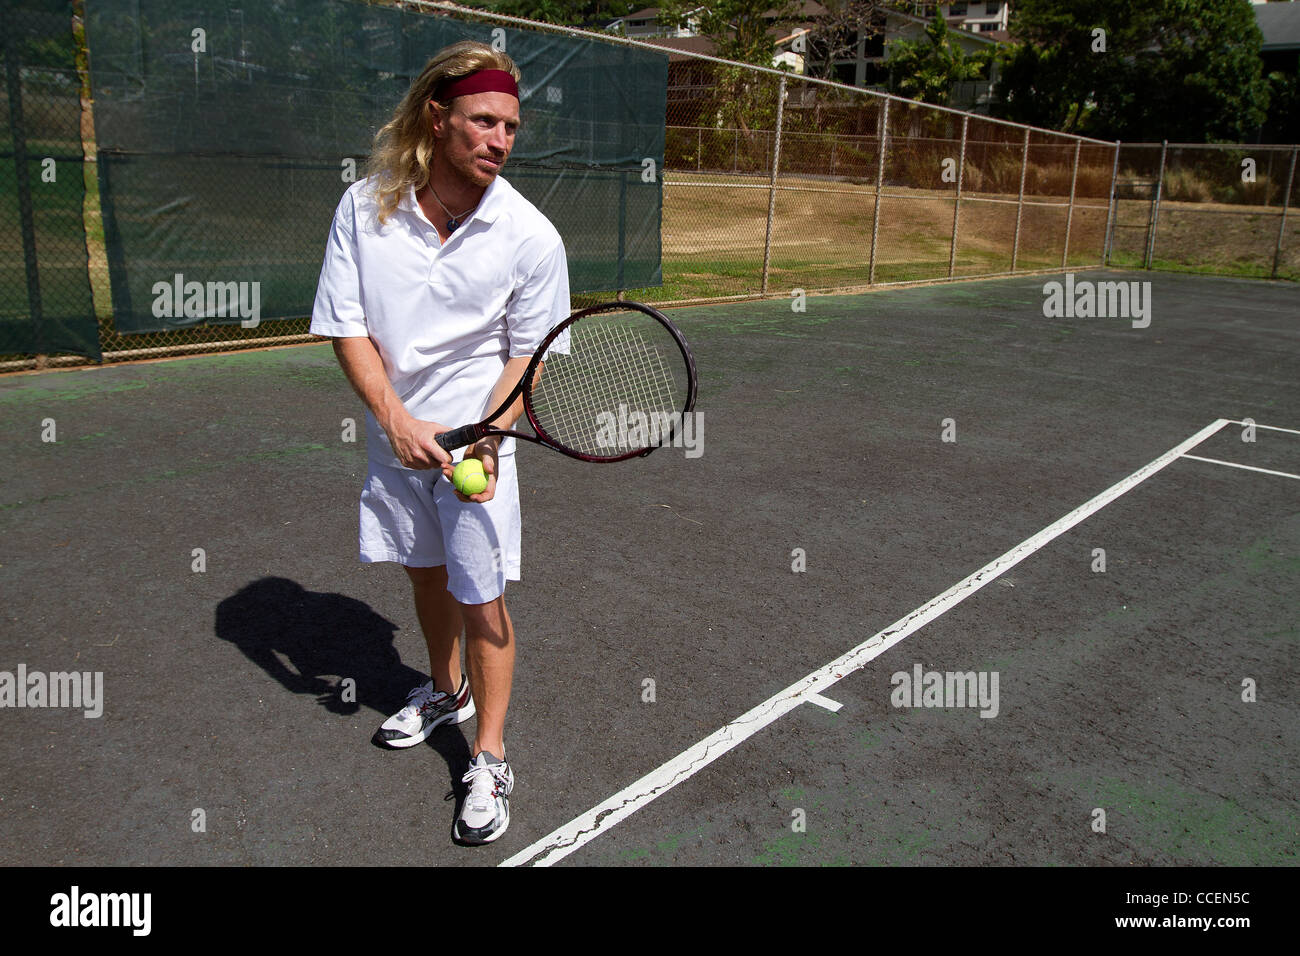 A blonde male tennis player gets prepared to make a strong overhand serve over the net. Stock Photo